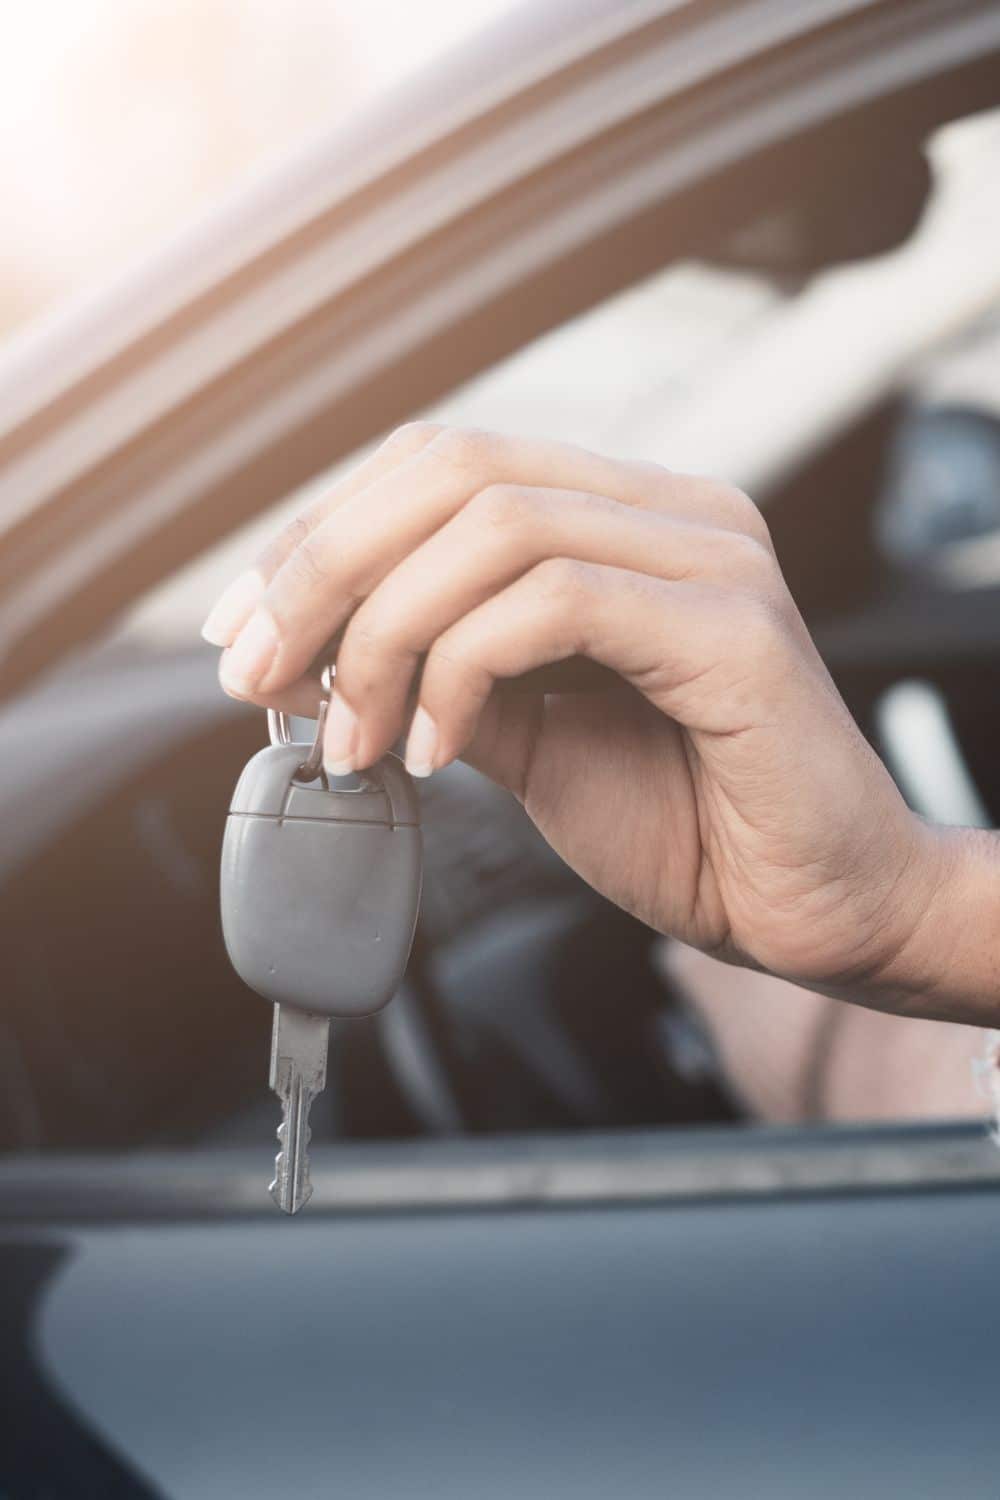 How to Make Your Car Ownership A Little More Affordable